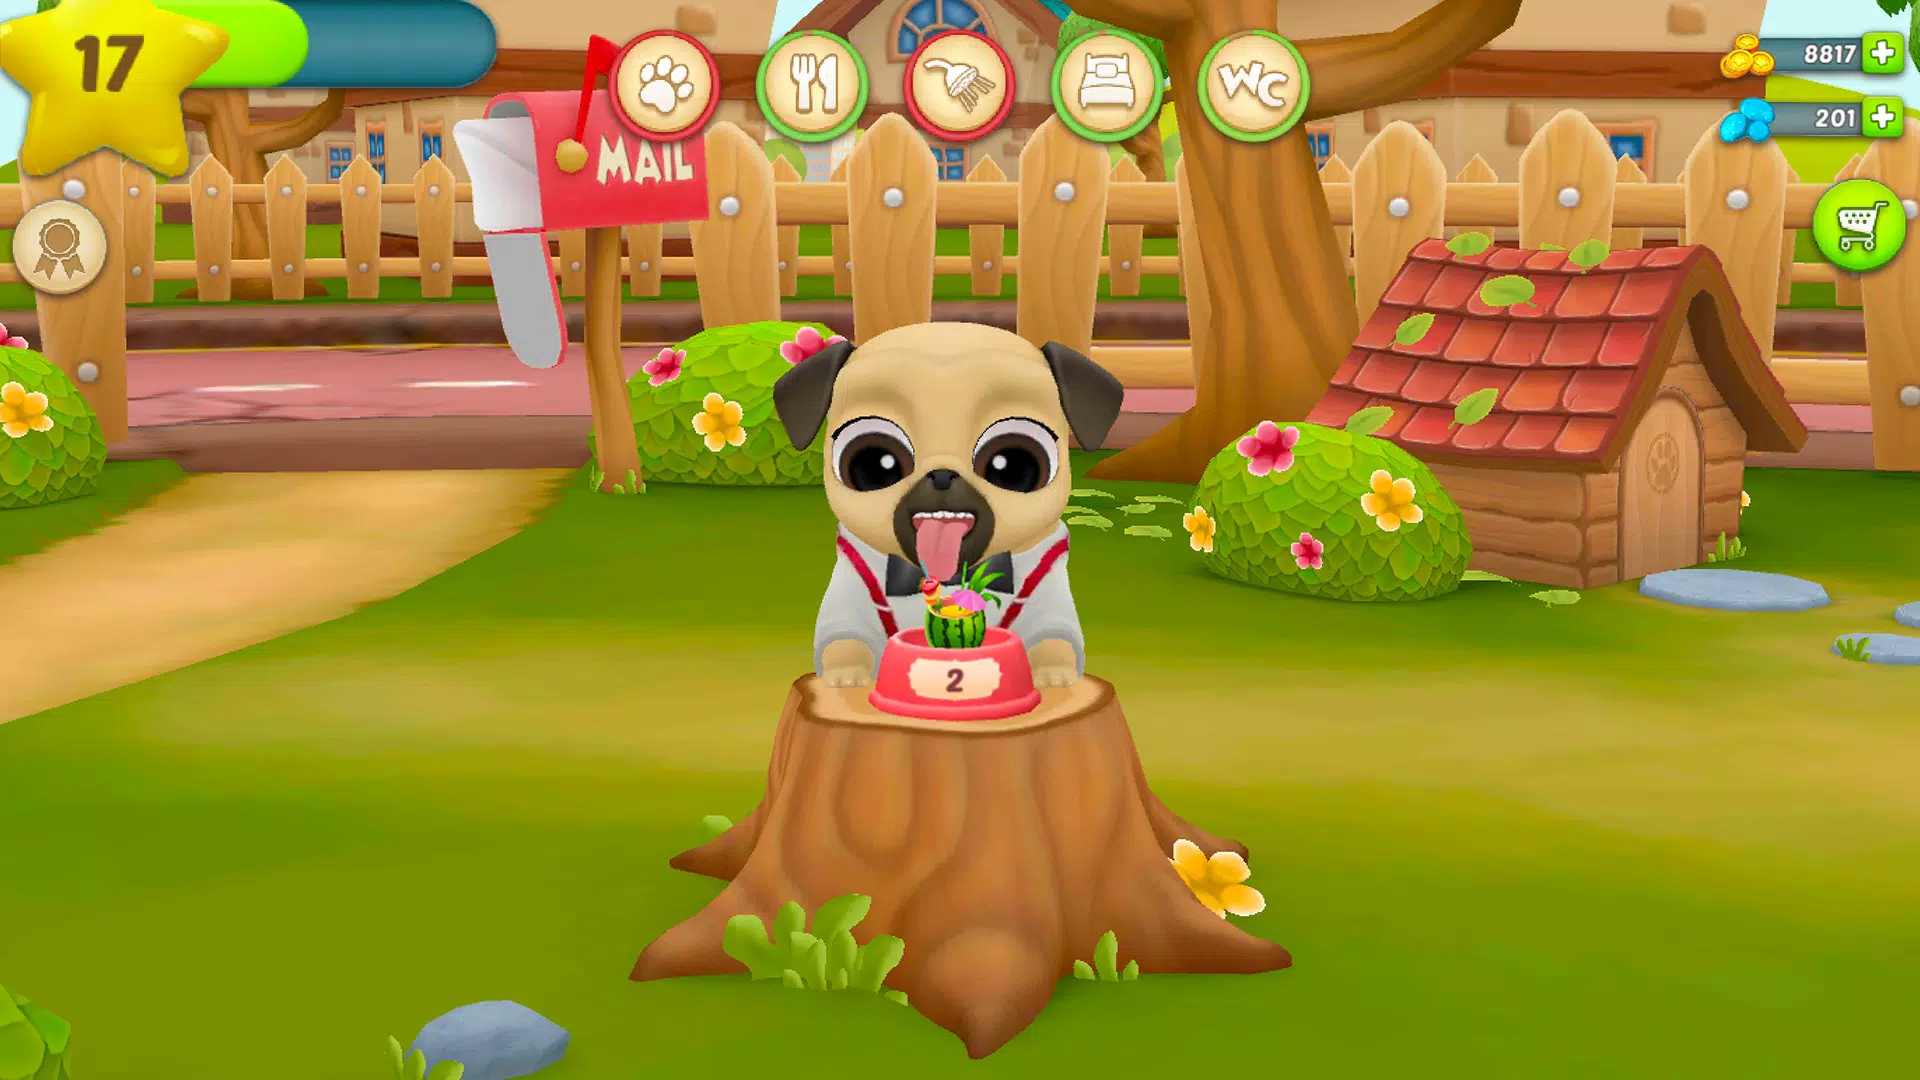 Pug - My Virtual Pet Dog APK for Android - Download